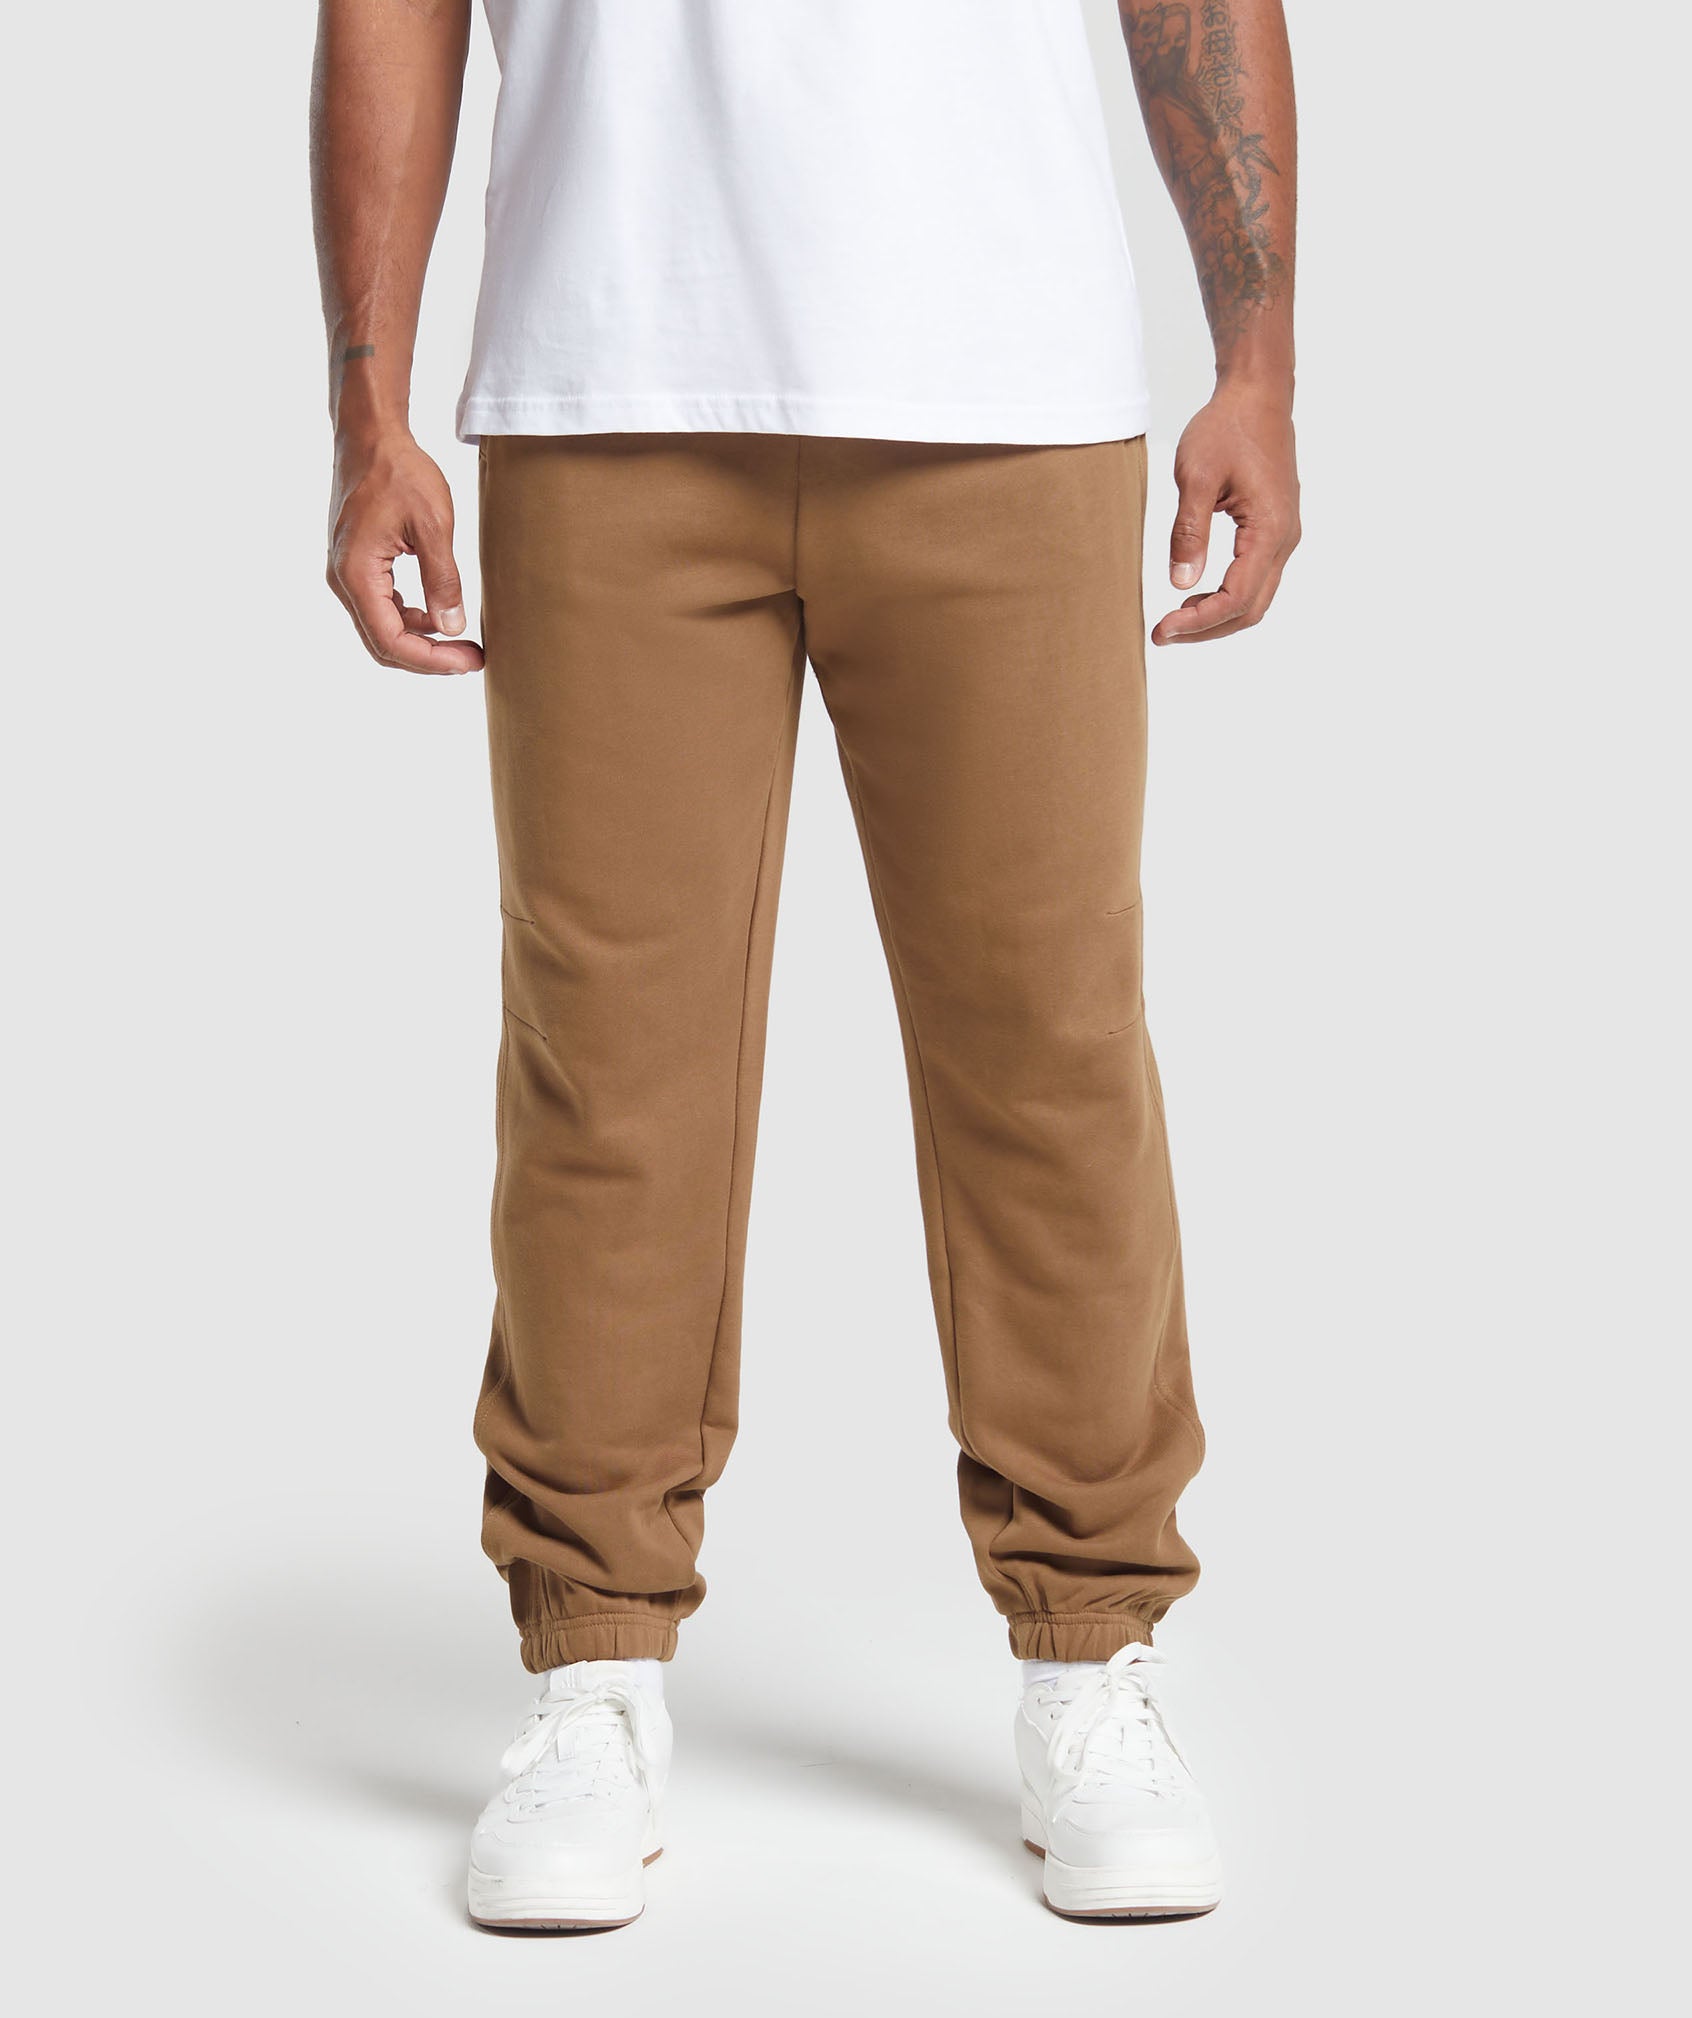 Rest Day Essentials Joggers in Caramel Brown - view 1